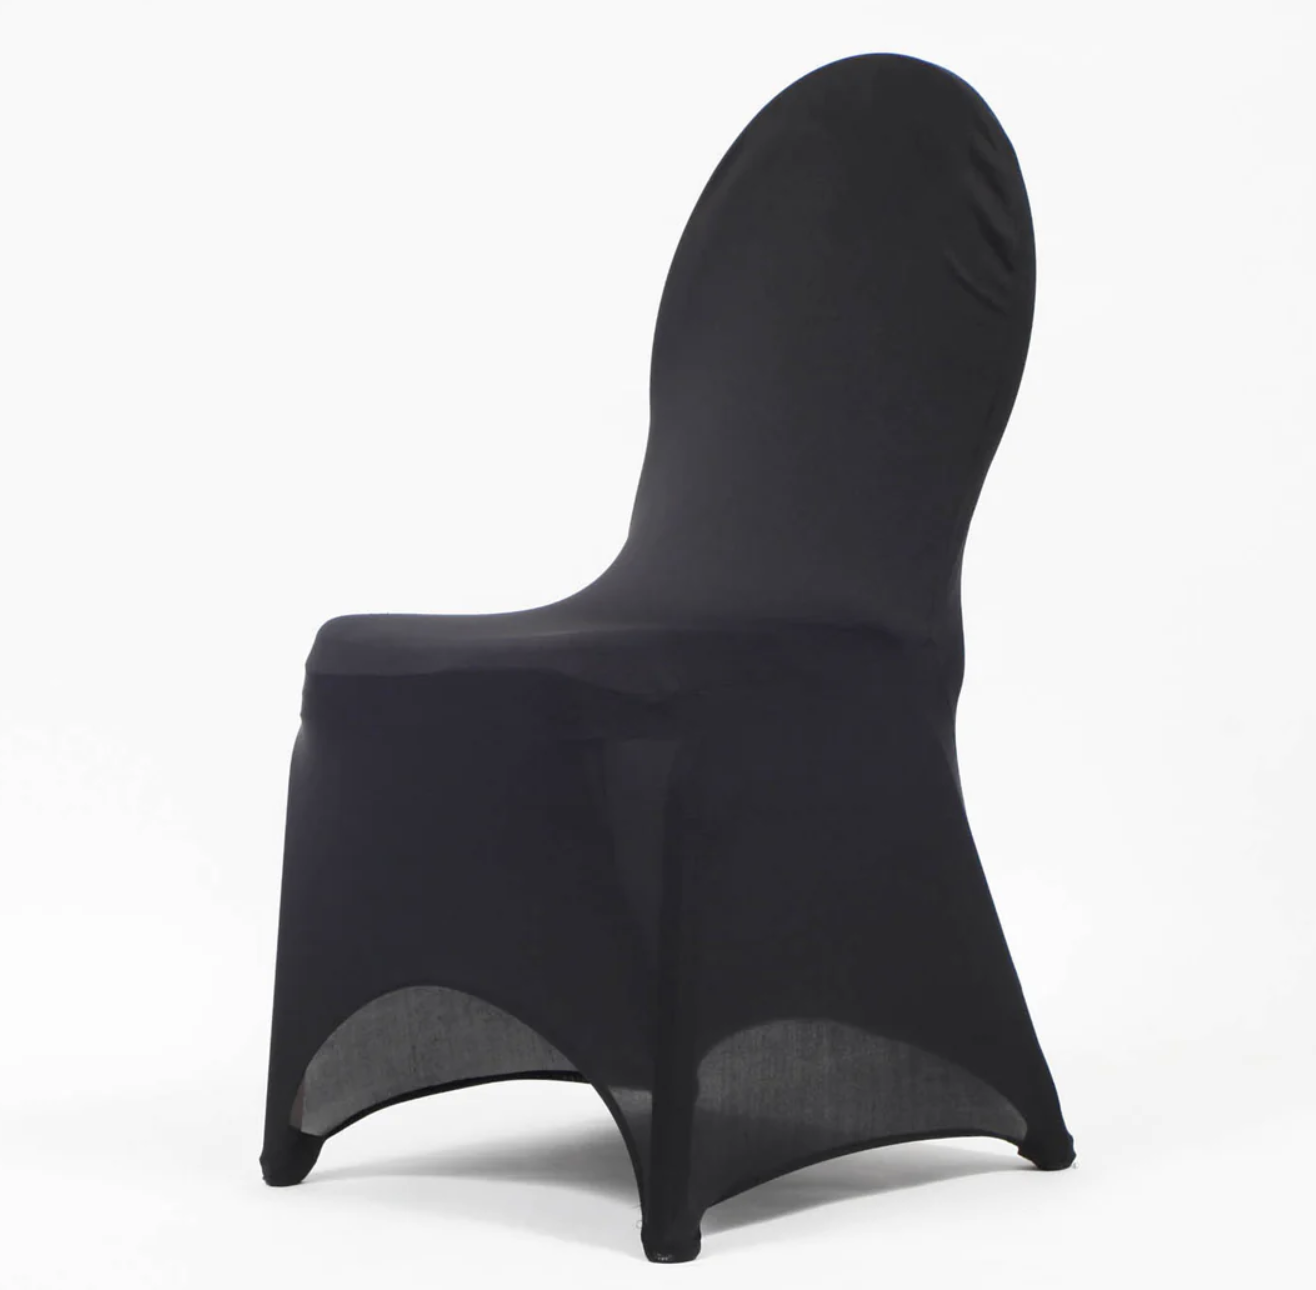 Lycra Black Chair Covers Hire